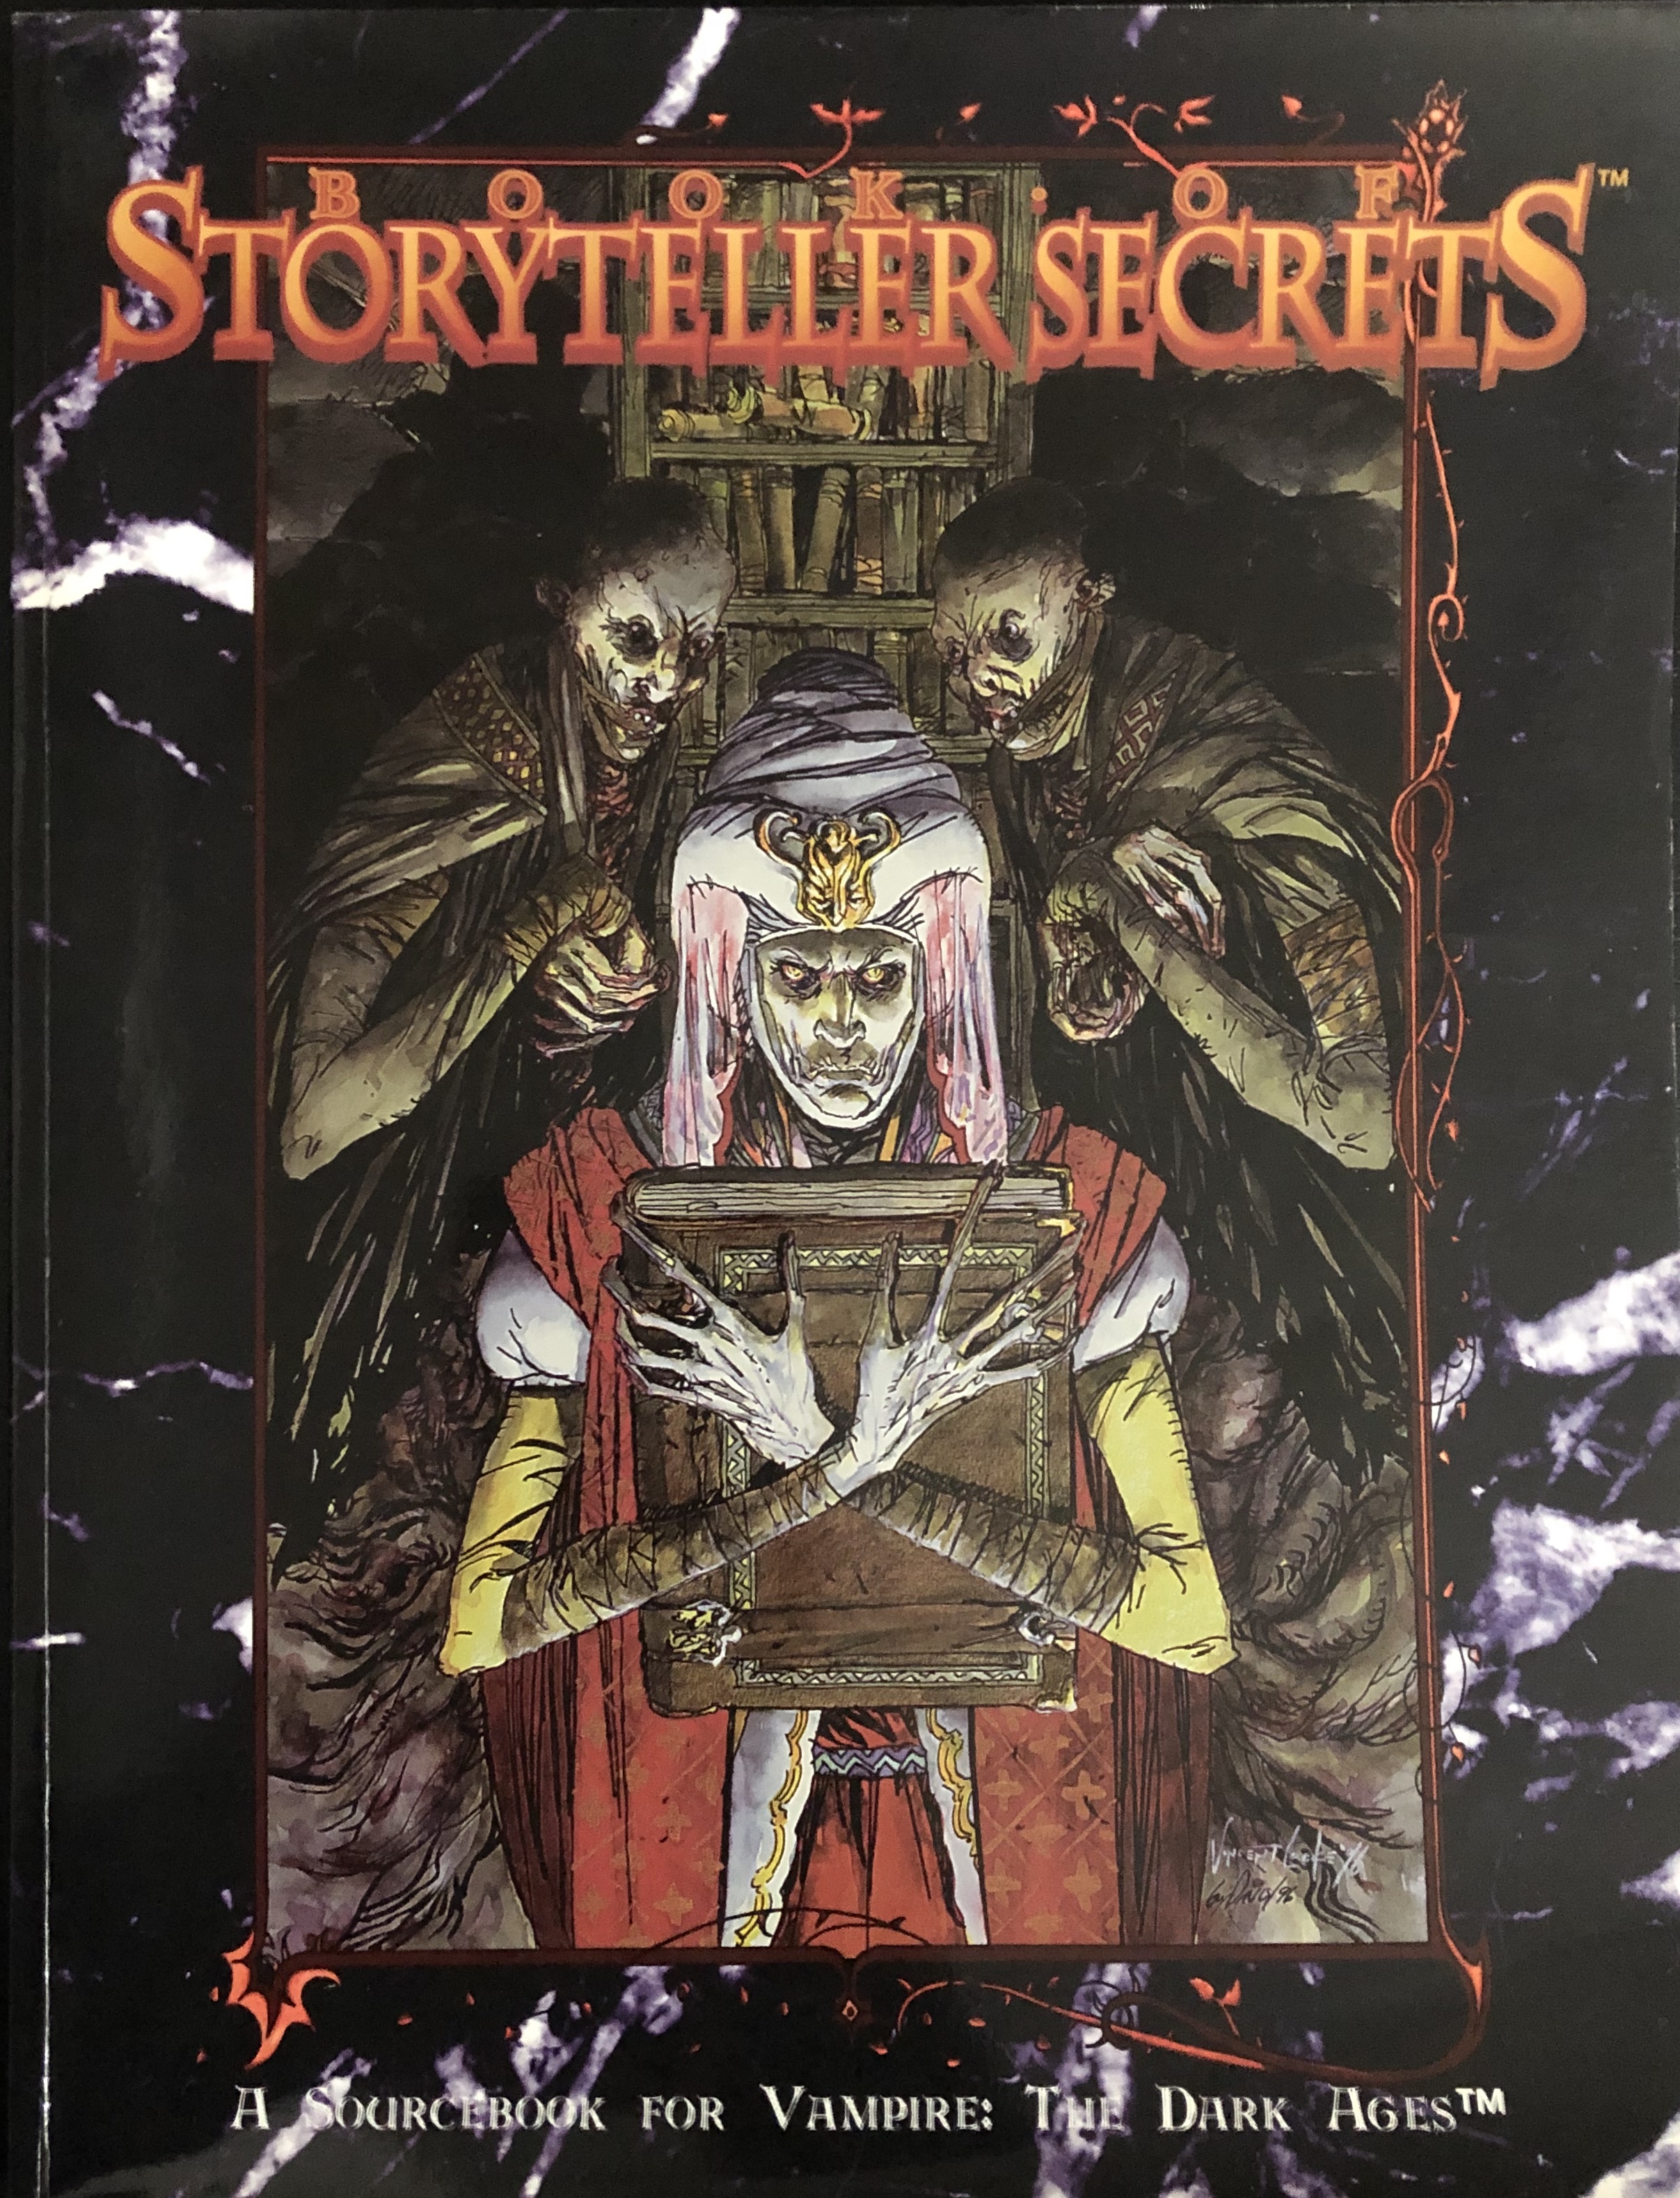 Vampire Ser.: The Dark Ages: Vampire : The Dark Ages by Kevin Hassall Jennifer Hartshorn for sale online 1996, Hardcover Ethan Skemp and Mark Rein-Hagen 